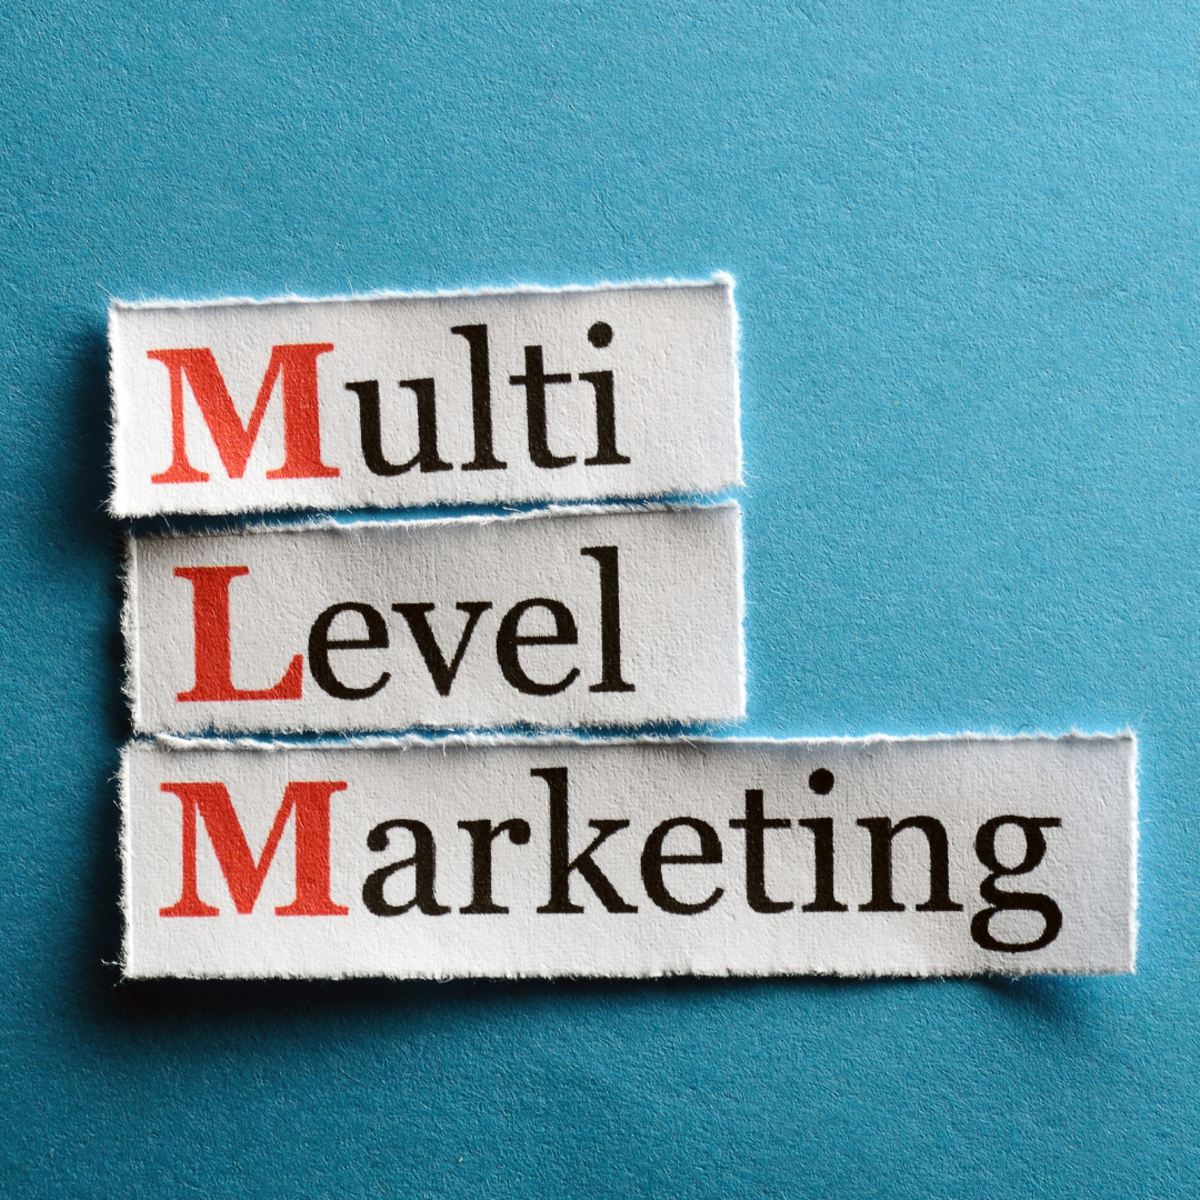 What are the flaws of multi-level marketing?